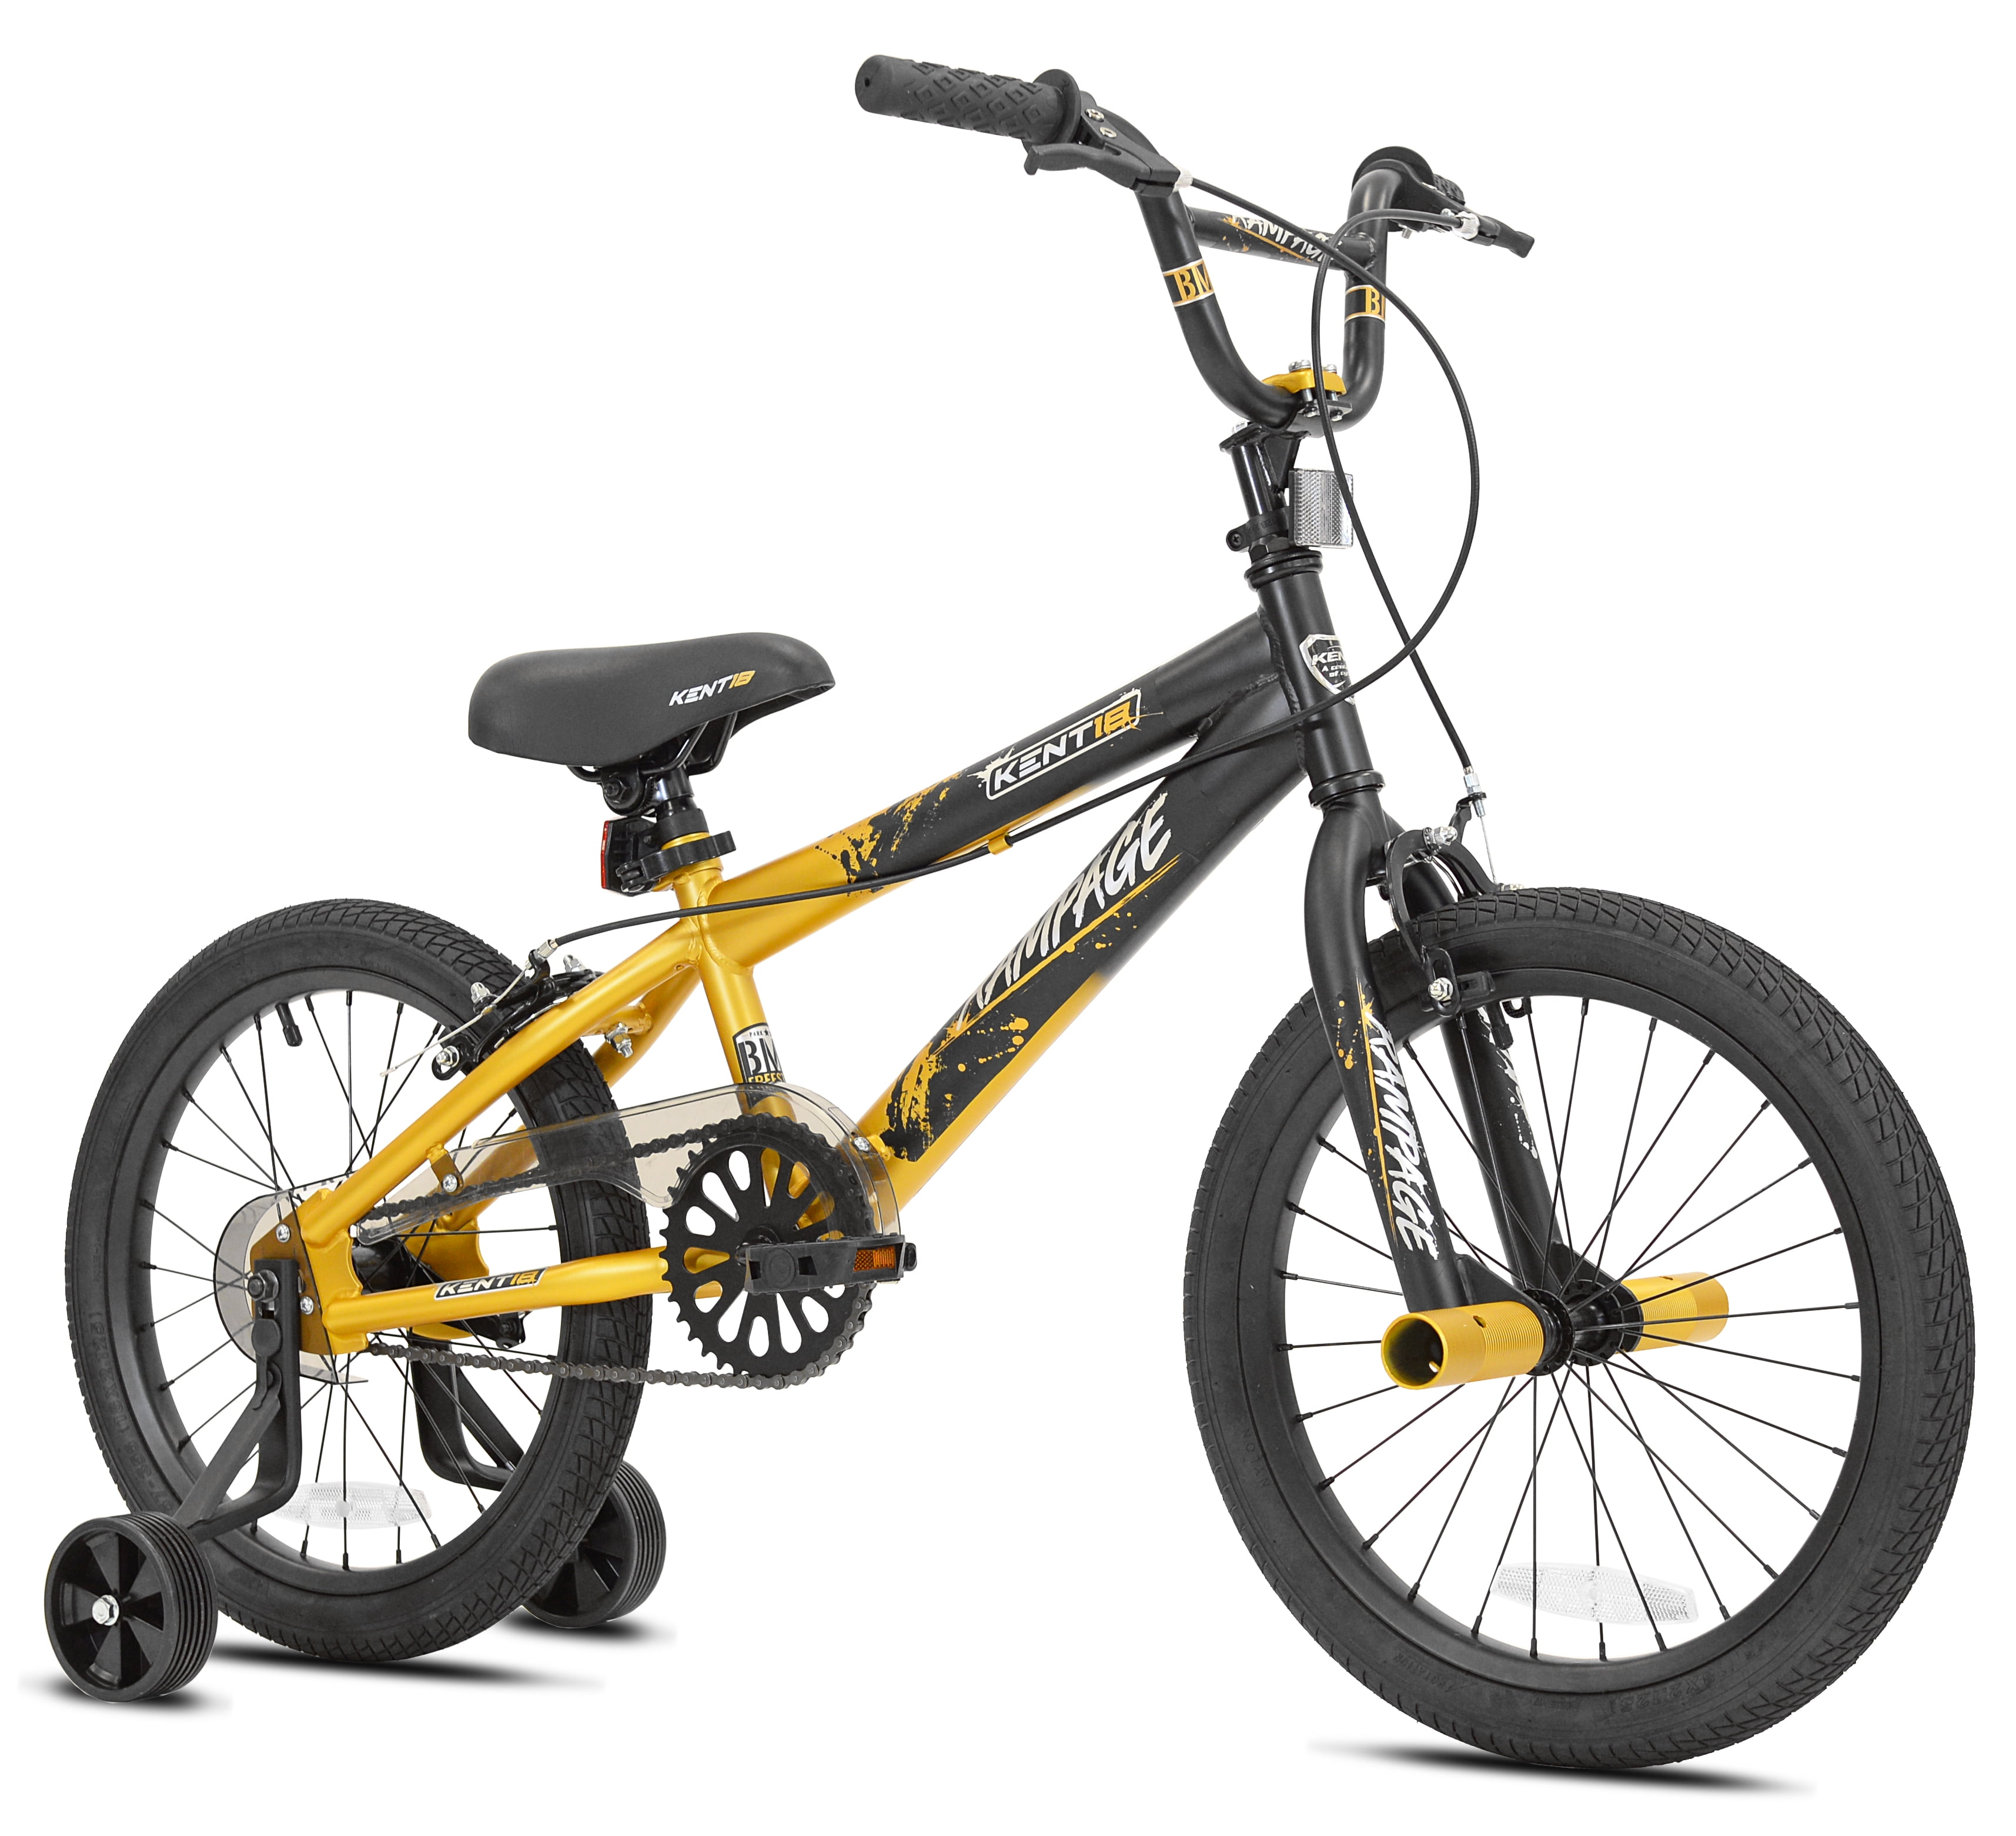 Huffy 18" Rock It Boys Bike Ages 4-8 yrs Height 42 to 48 inches Neon Yellow New